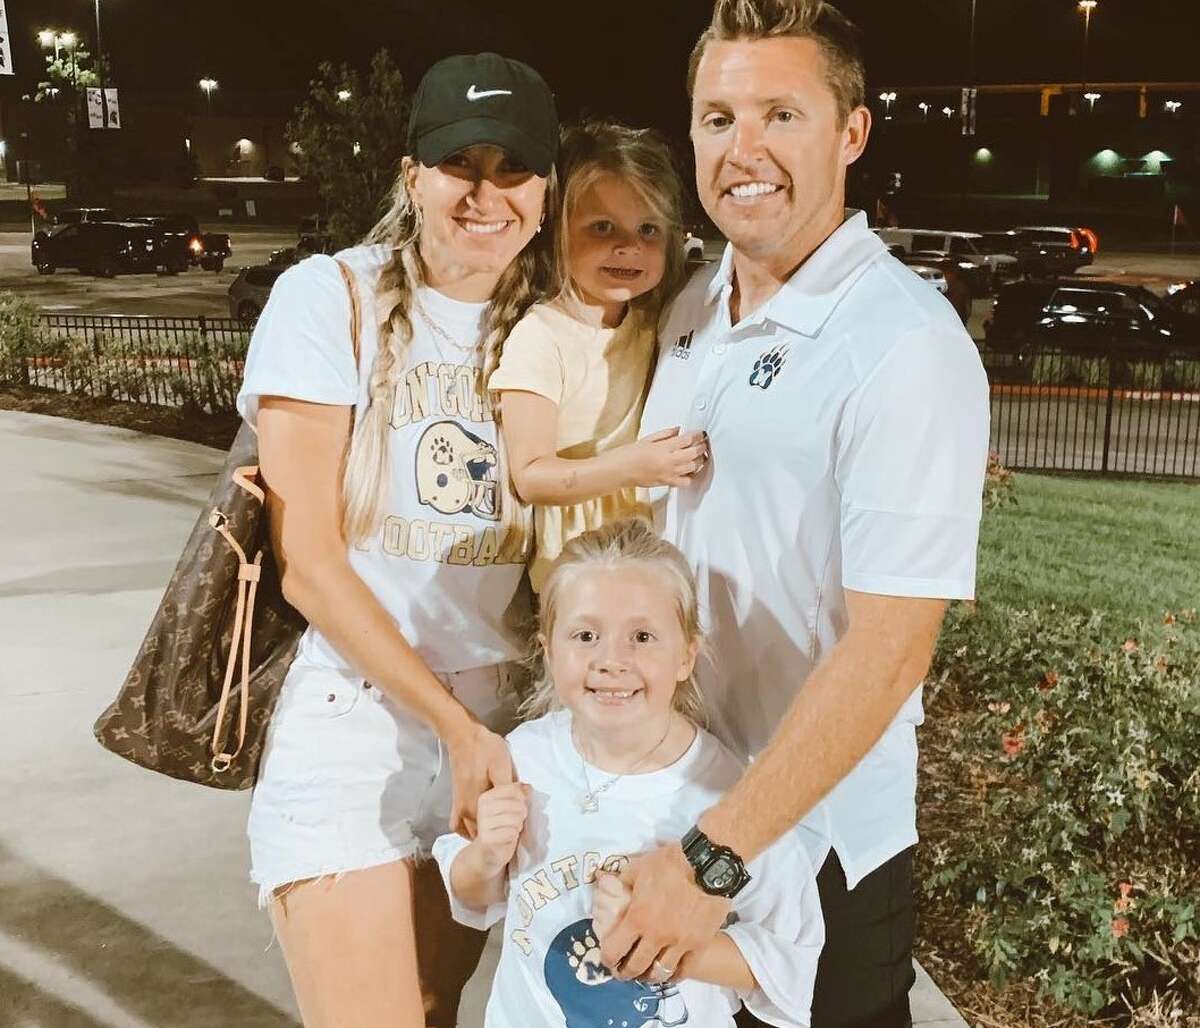 New Legacy Prep football coach Sam Oelschlegel is seen with his family, including wife Blaine and daughters Gracen and Micah.